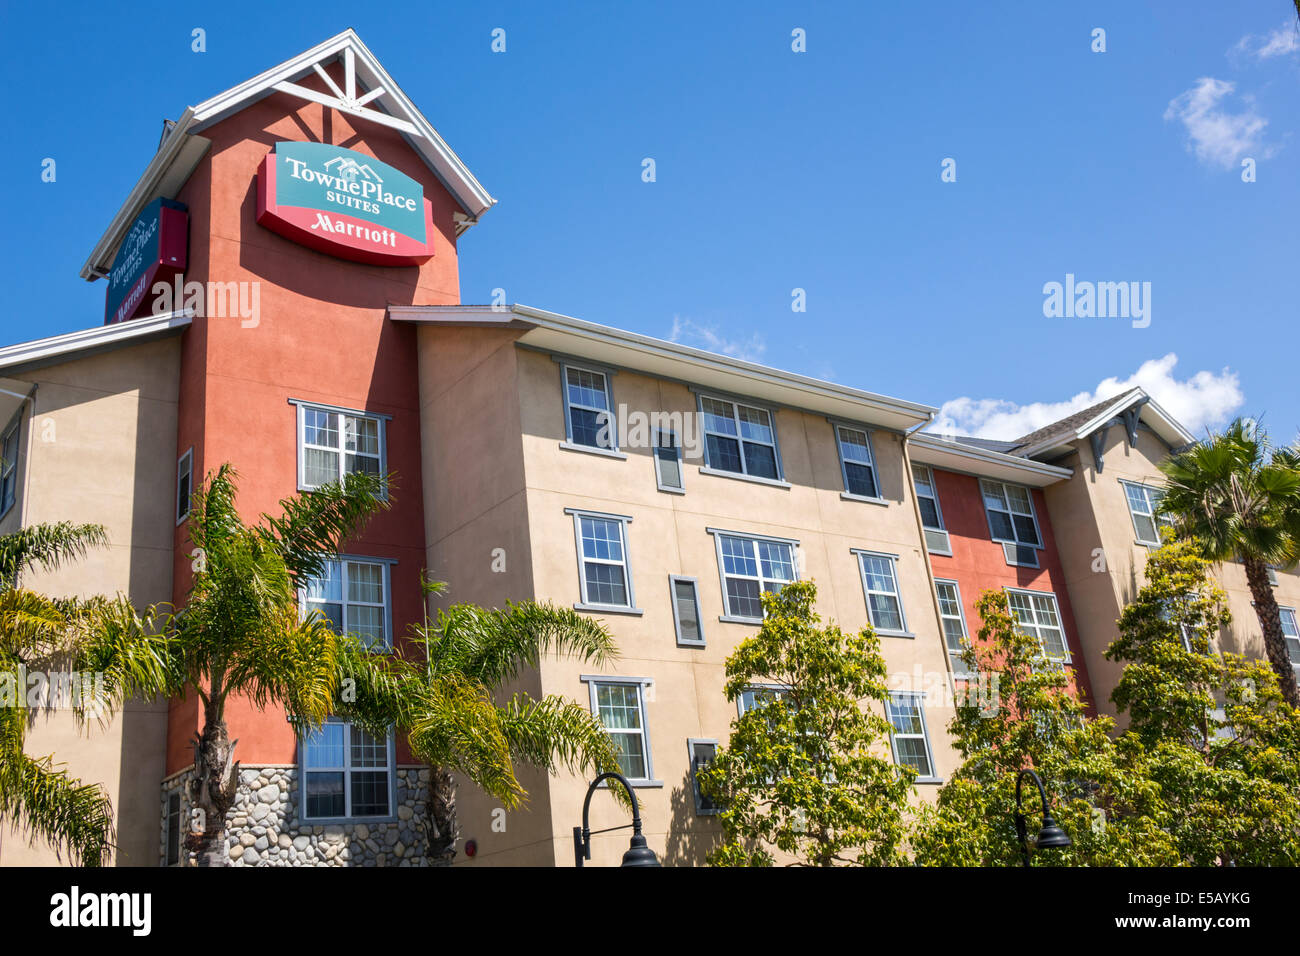 Los Angeles California,Manhattan Beach,Marriott,TownePlace Suites,extended-stay,hotel,chain,lodging,exterior,sign,signs,logo,building,CA140401001 Stock Photo